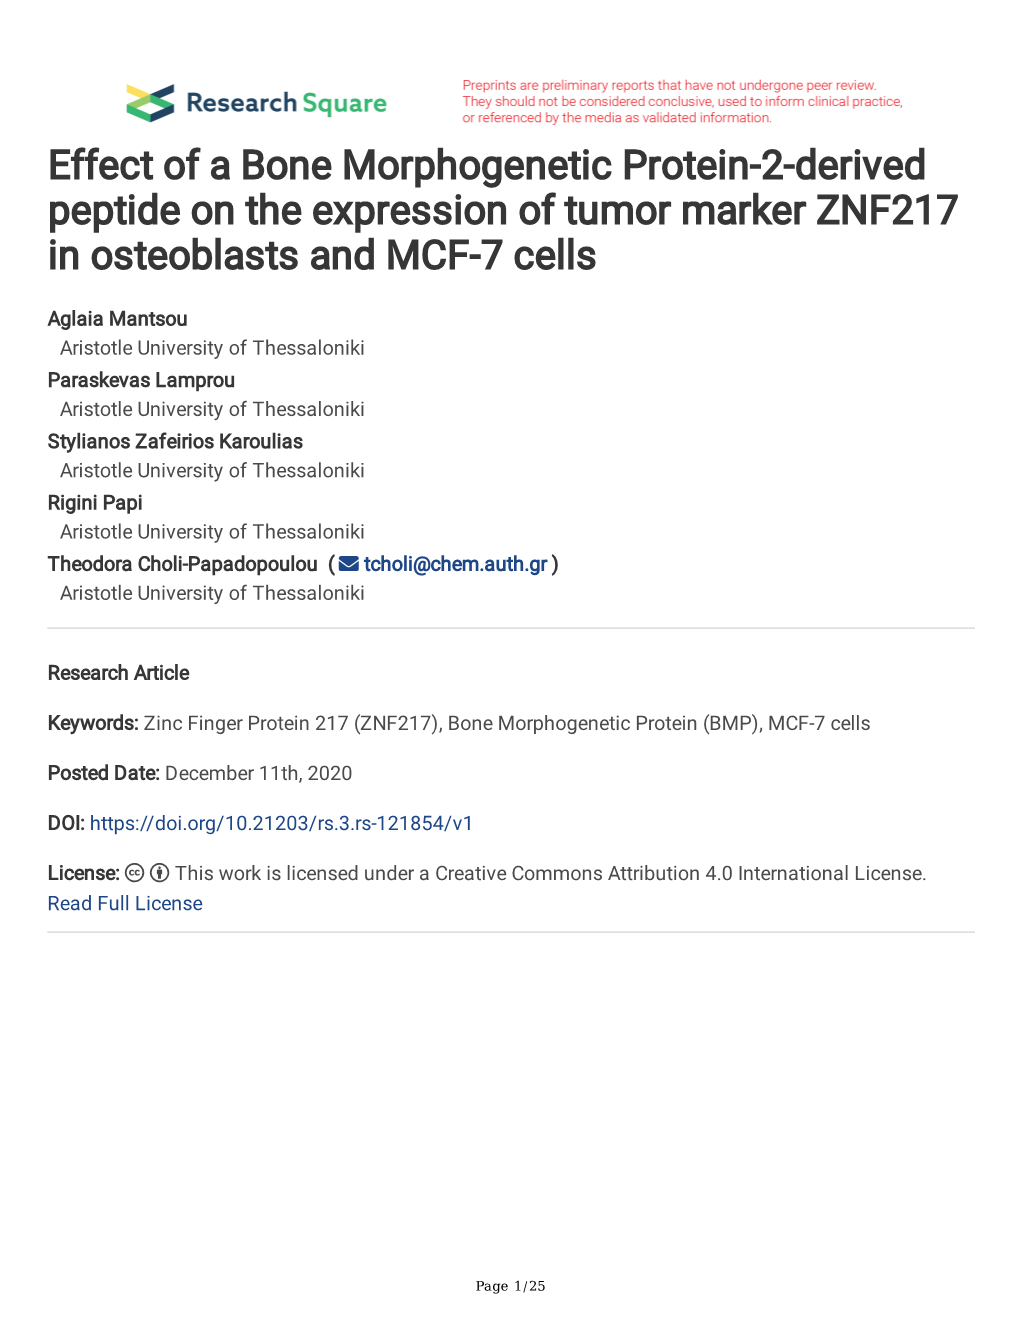 Effect of a Bone Morphogenetic Protein-2-Derived Peptide on the Expression of Tumor Marker ZNF217 in Osteoblasts and MCF-7 Cells